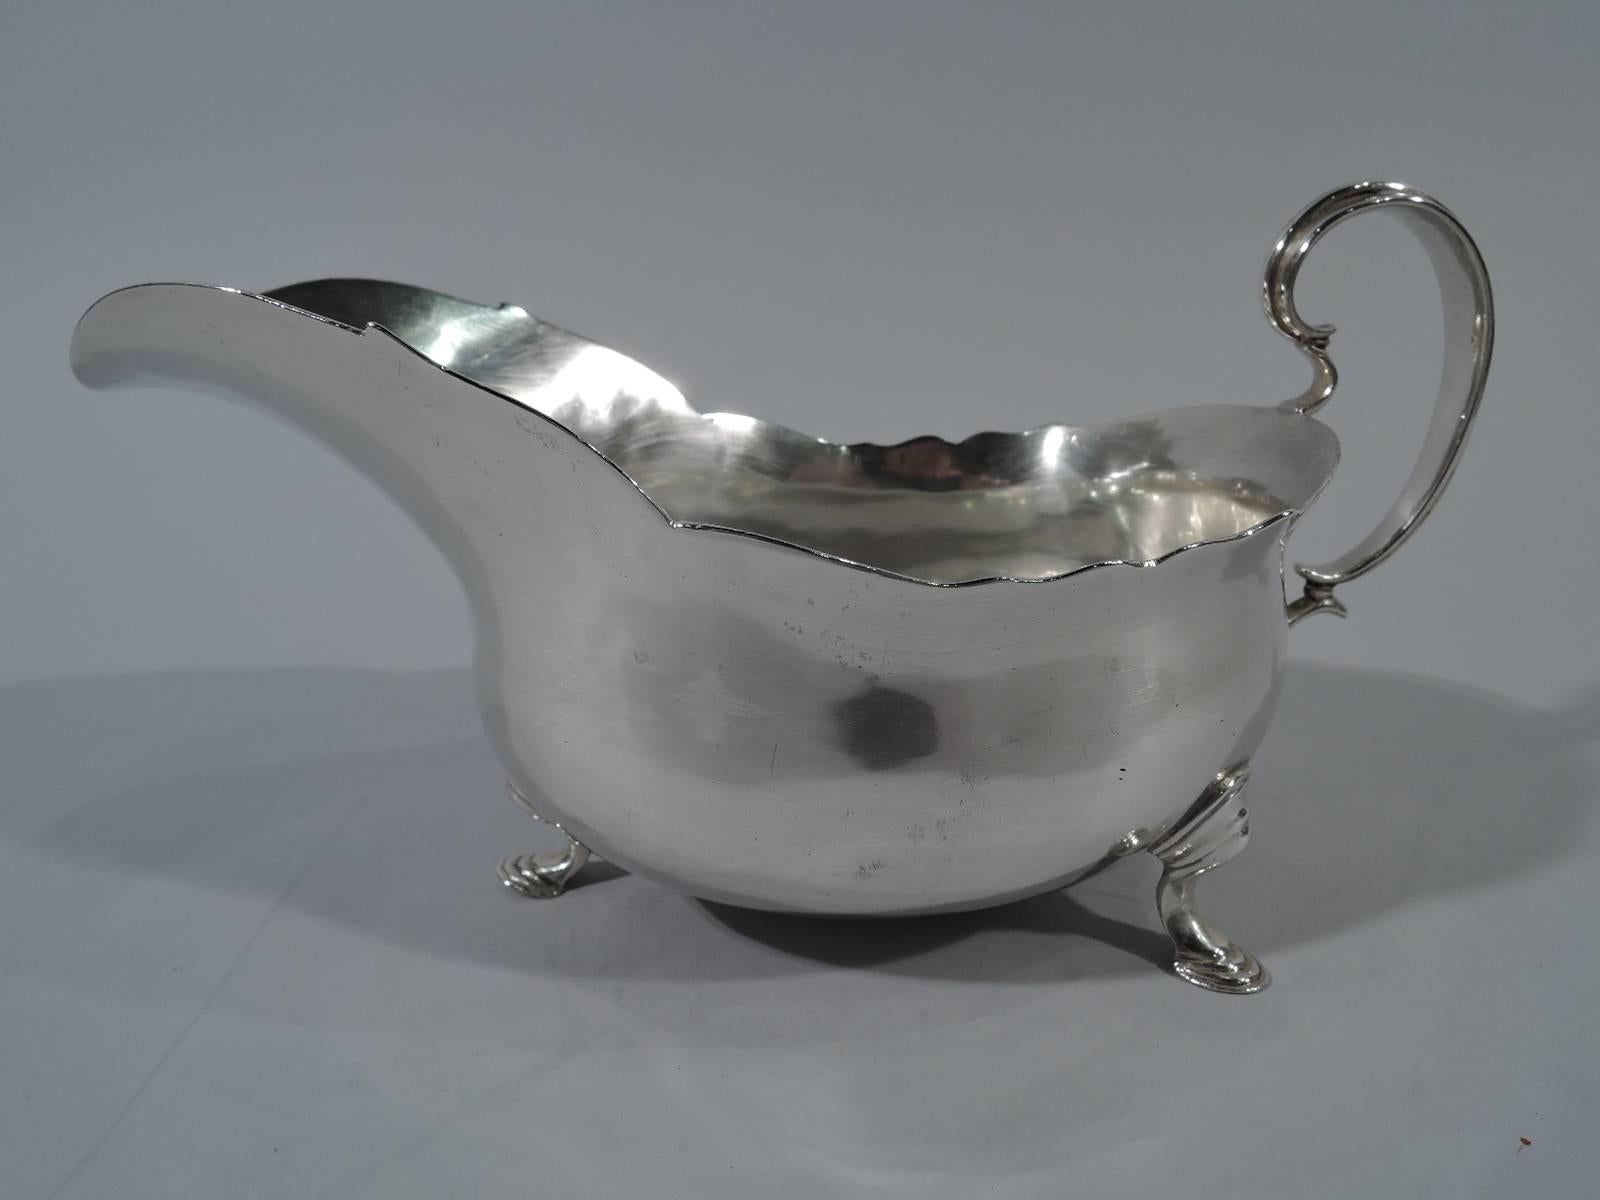 George III sterling silver gravy boat. Made by John Parker & Edward Wakelin in London in 1770. Curved bowl with helmet mouth and high-looping double-scroll handle. Rests on 3 hoof supports. Sturdy Georgian with nice heft. Hallmarked. Weight: 9.5